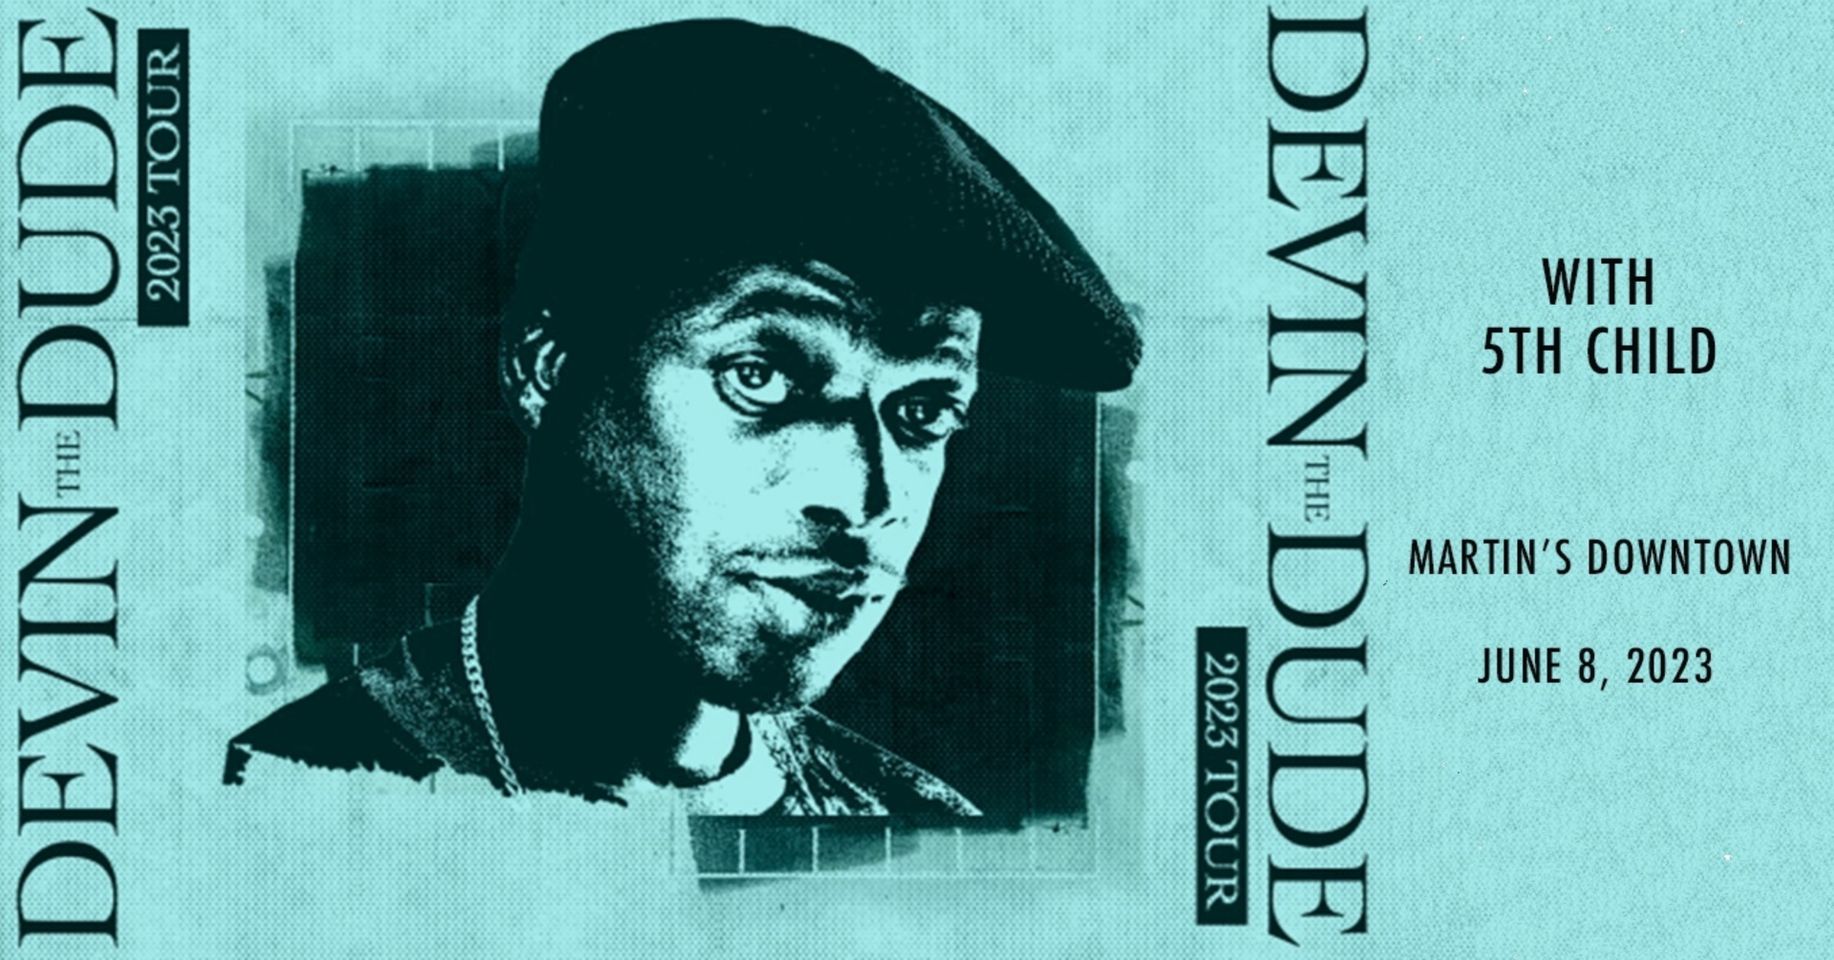 Devin The Dude with 5th Child Live at Martin’s Downtown